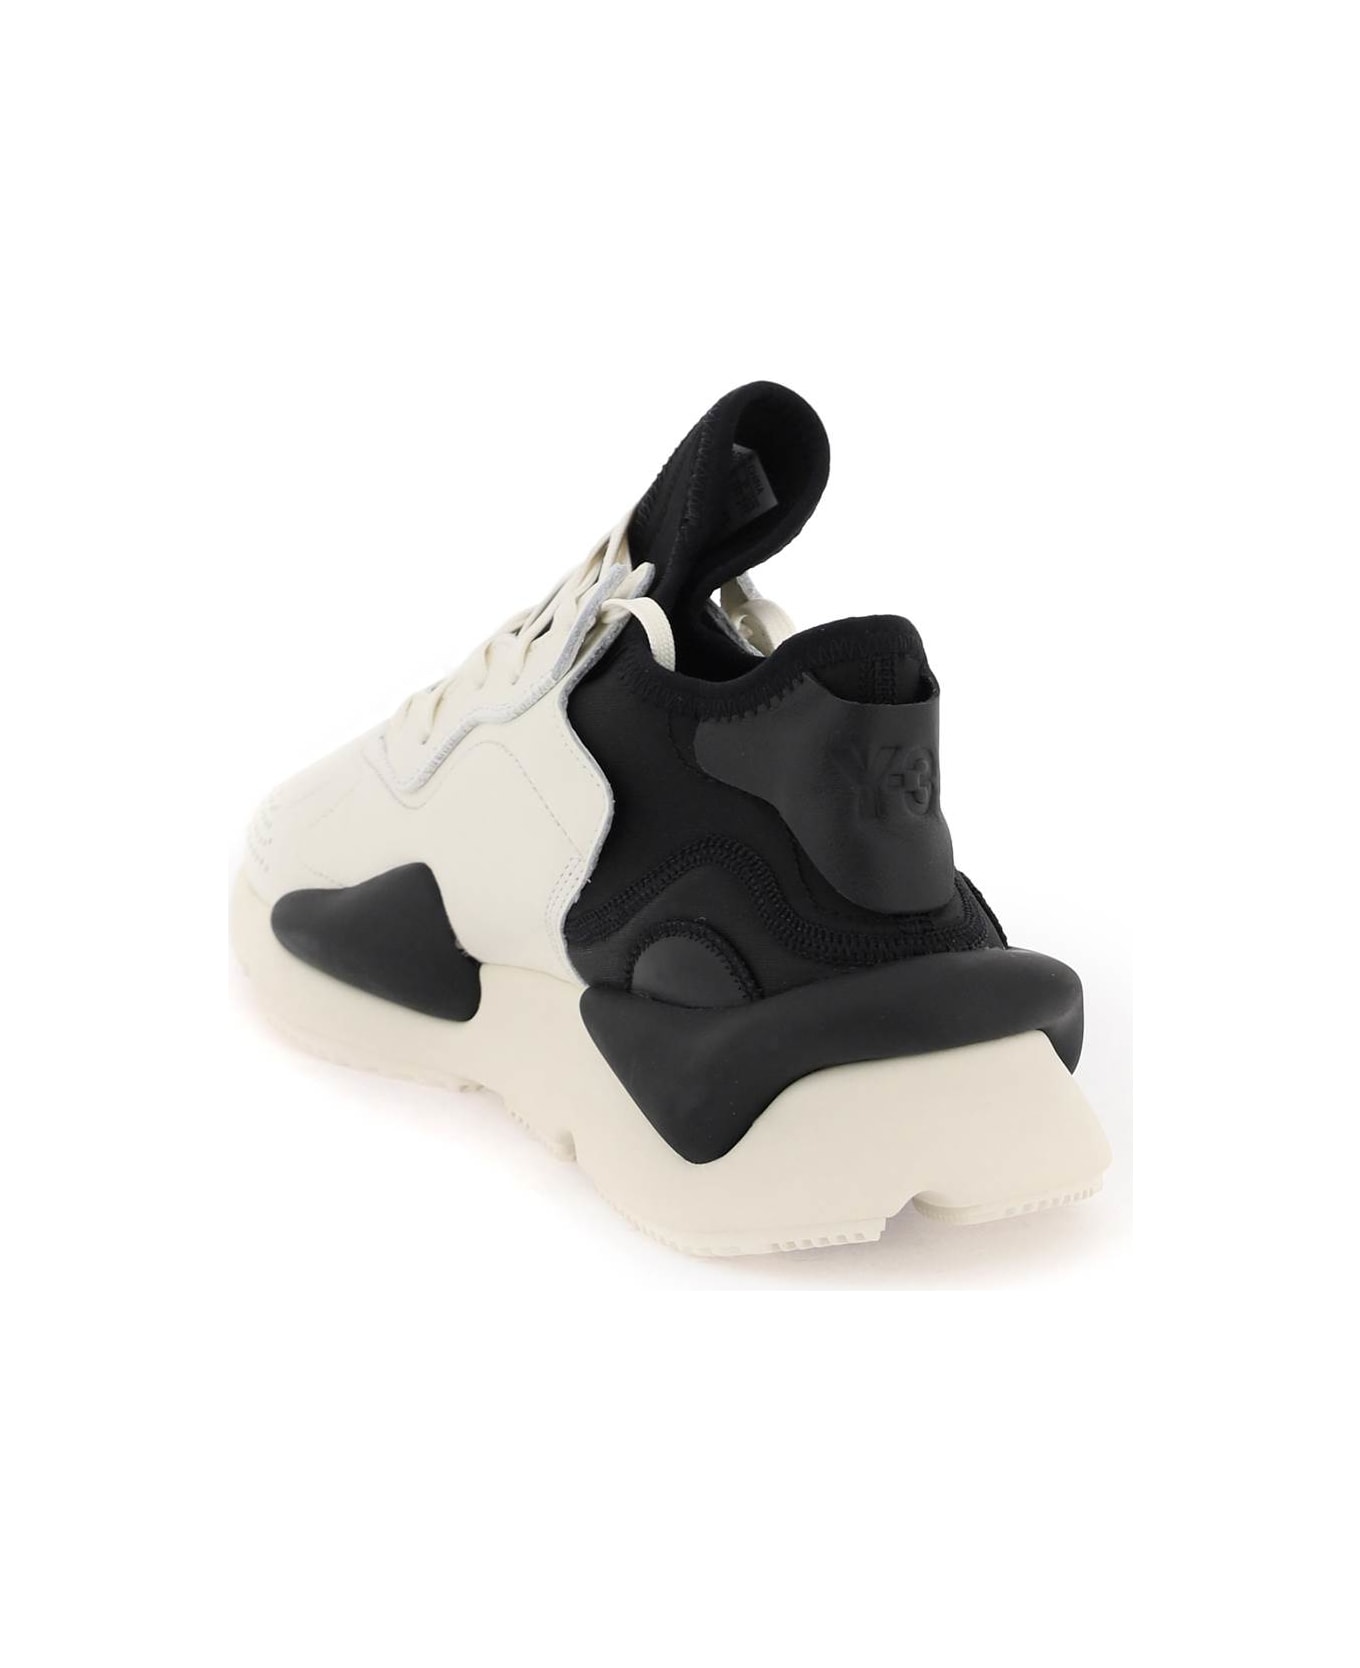 Y-3 Kaiwa Leather And Fabric Low-top Sneakers - White スニーカー